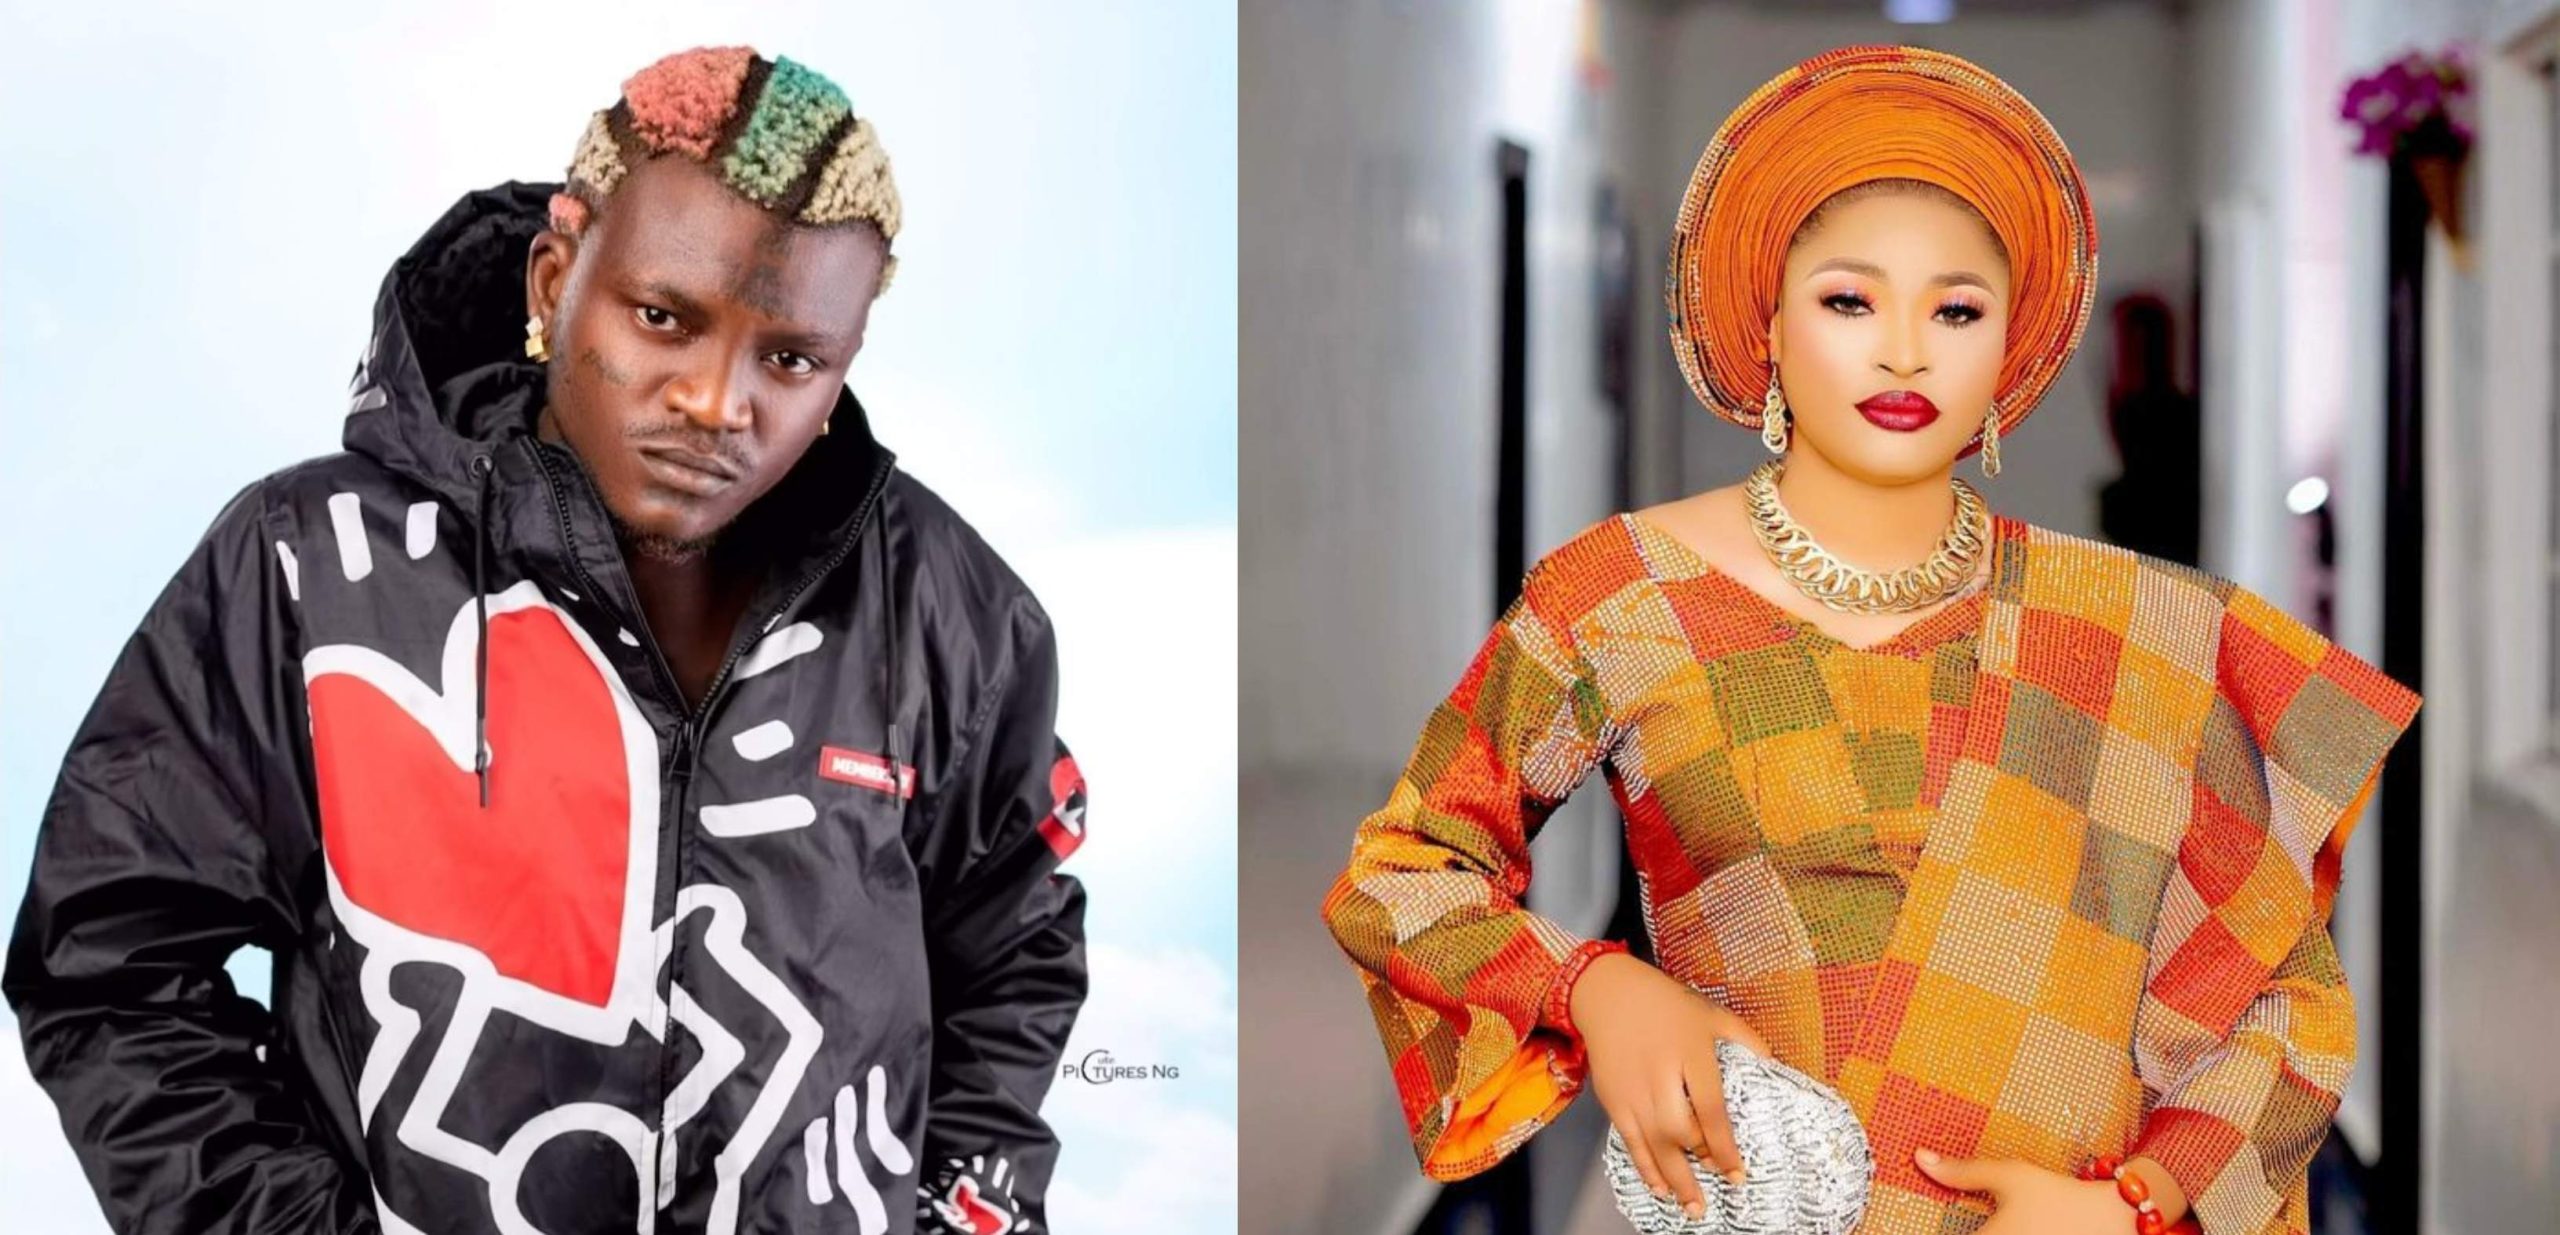 Angry Portable calls out late Alaafin’s wife over refusal to have his baby